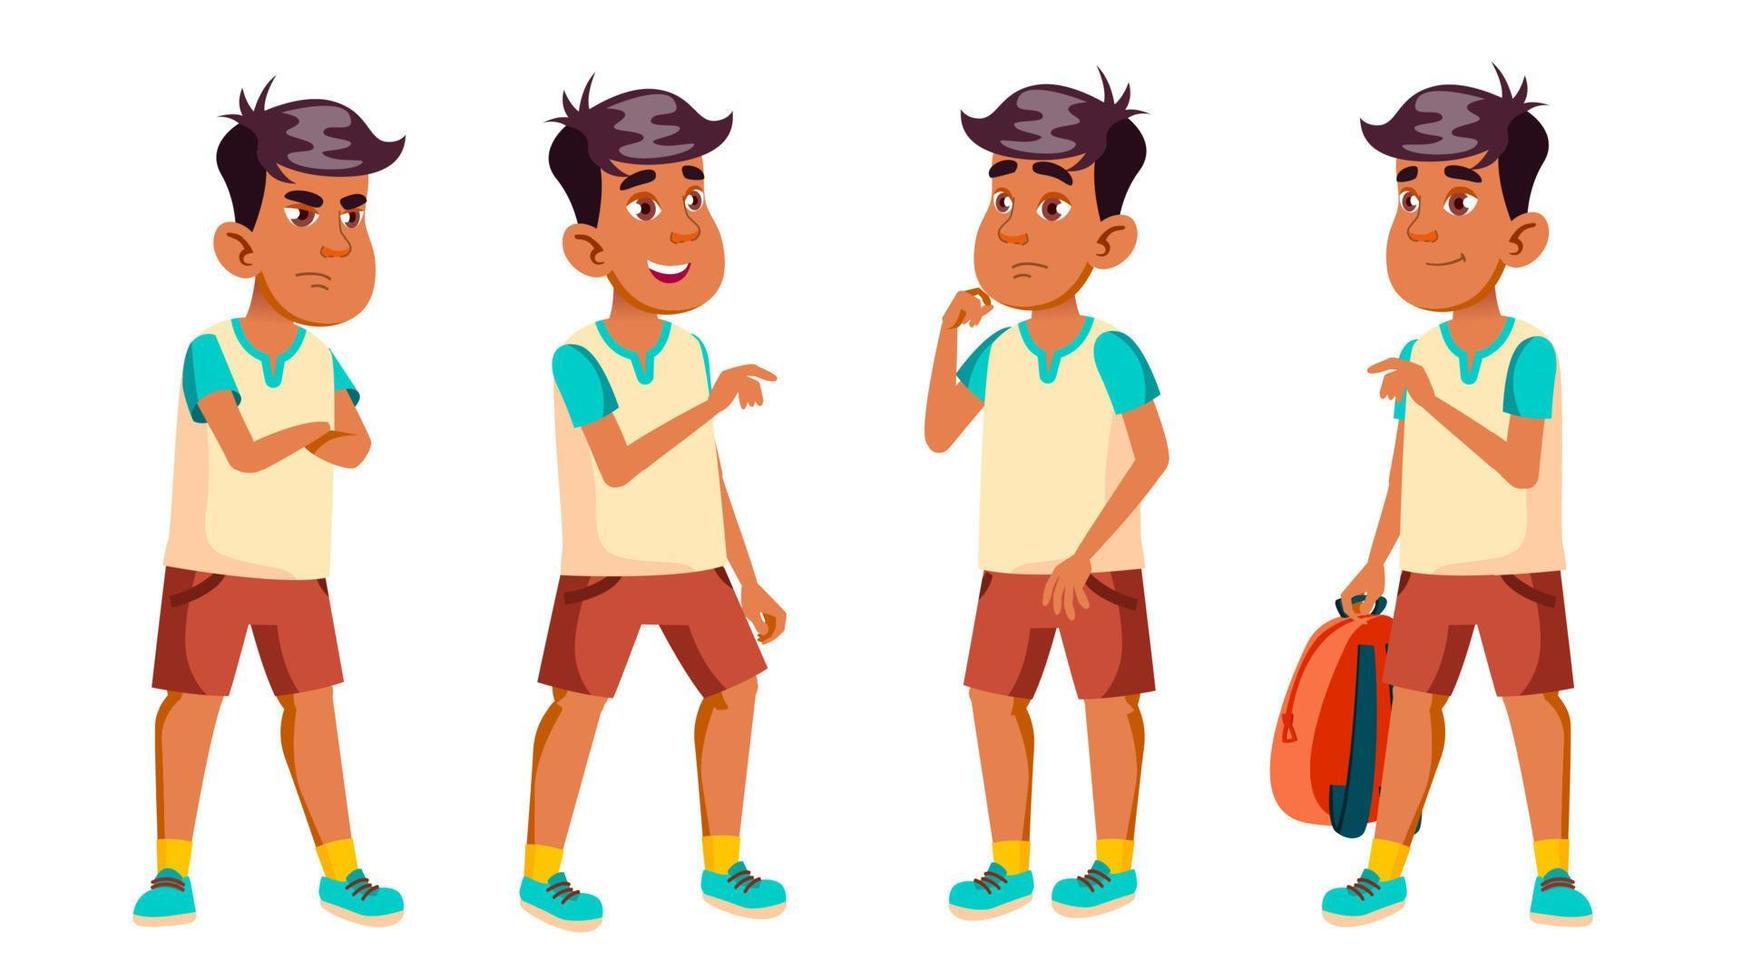 Arab, Muslim Boy Schoolboy Kid Poses Set Vector. High School Child. Clever, Studying. For Postcard, Announcement, Cover Design. Isolated Cartoon Illustration vector